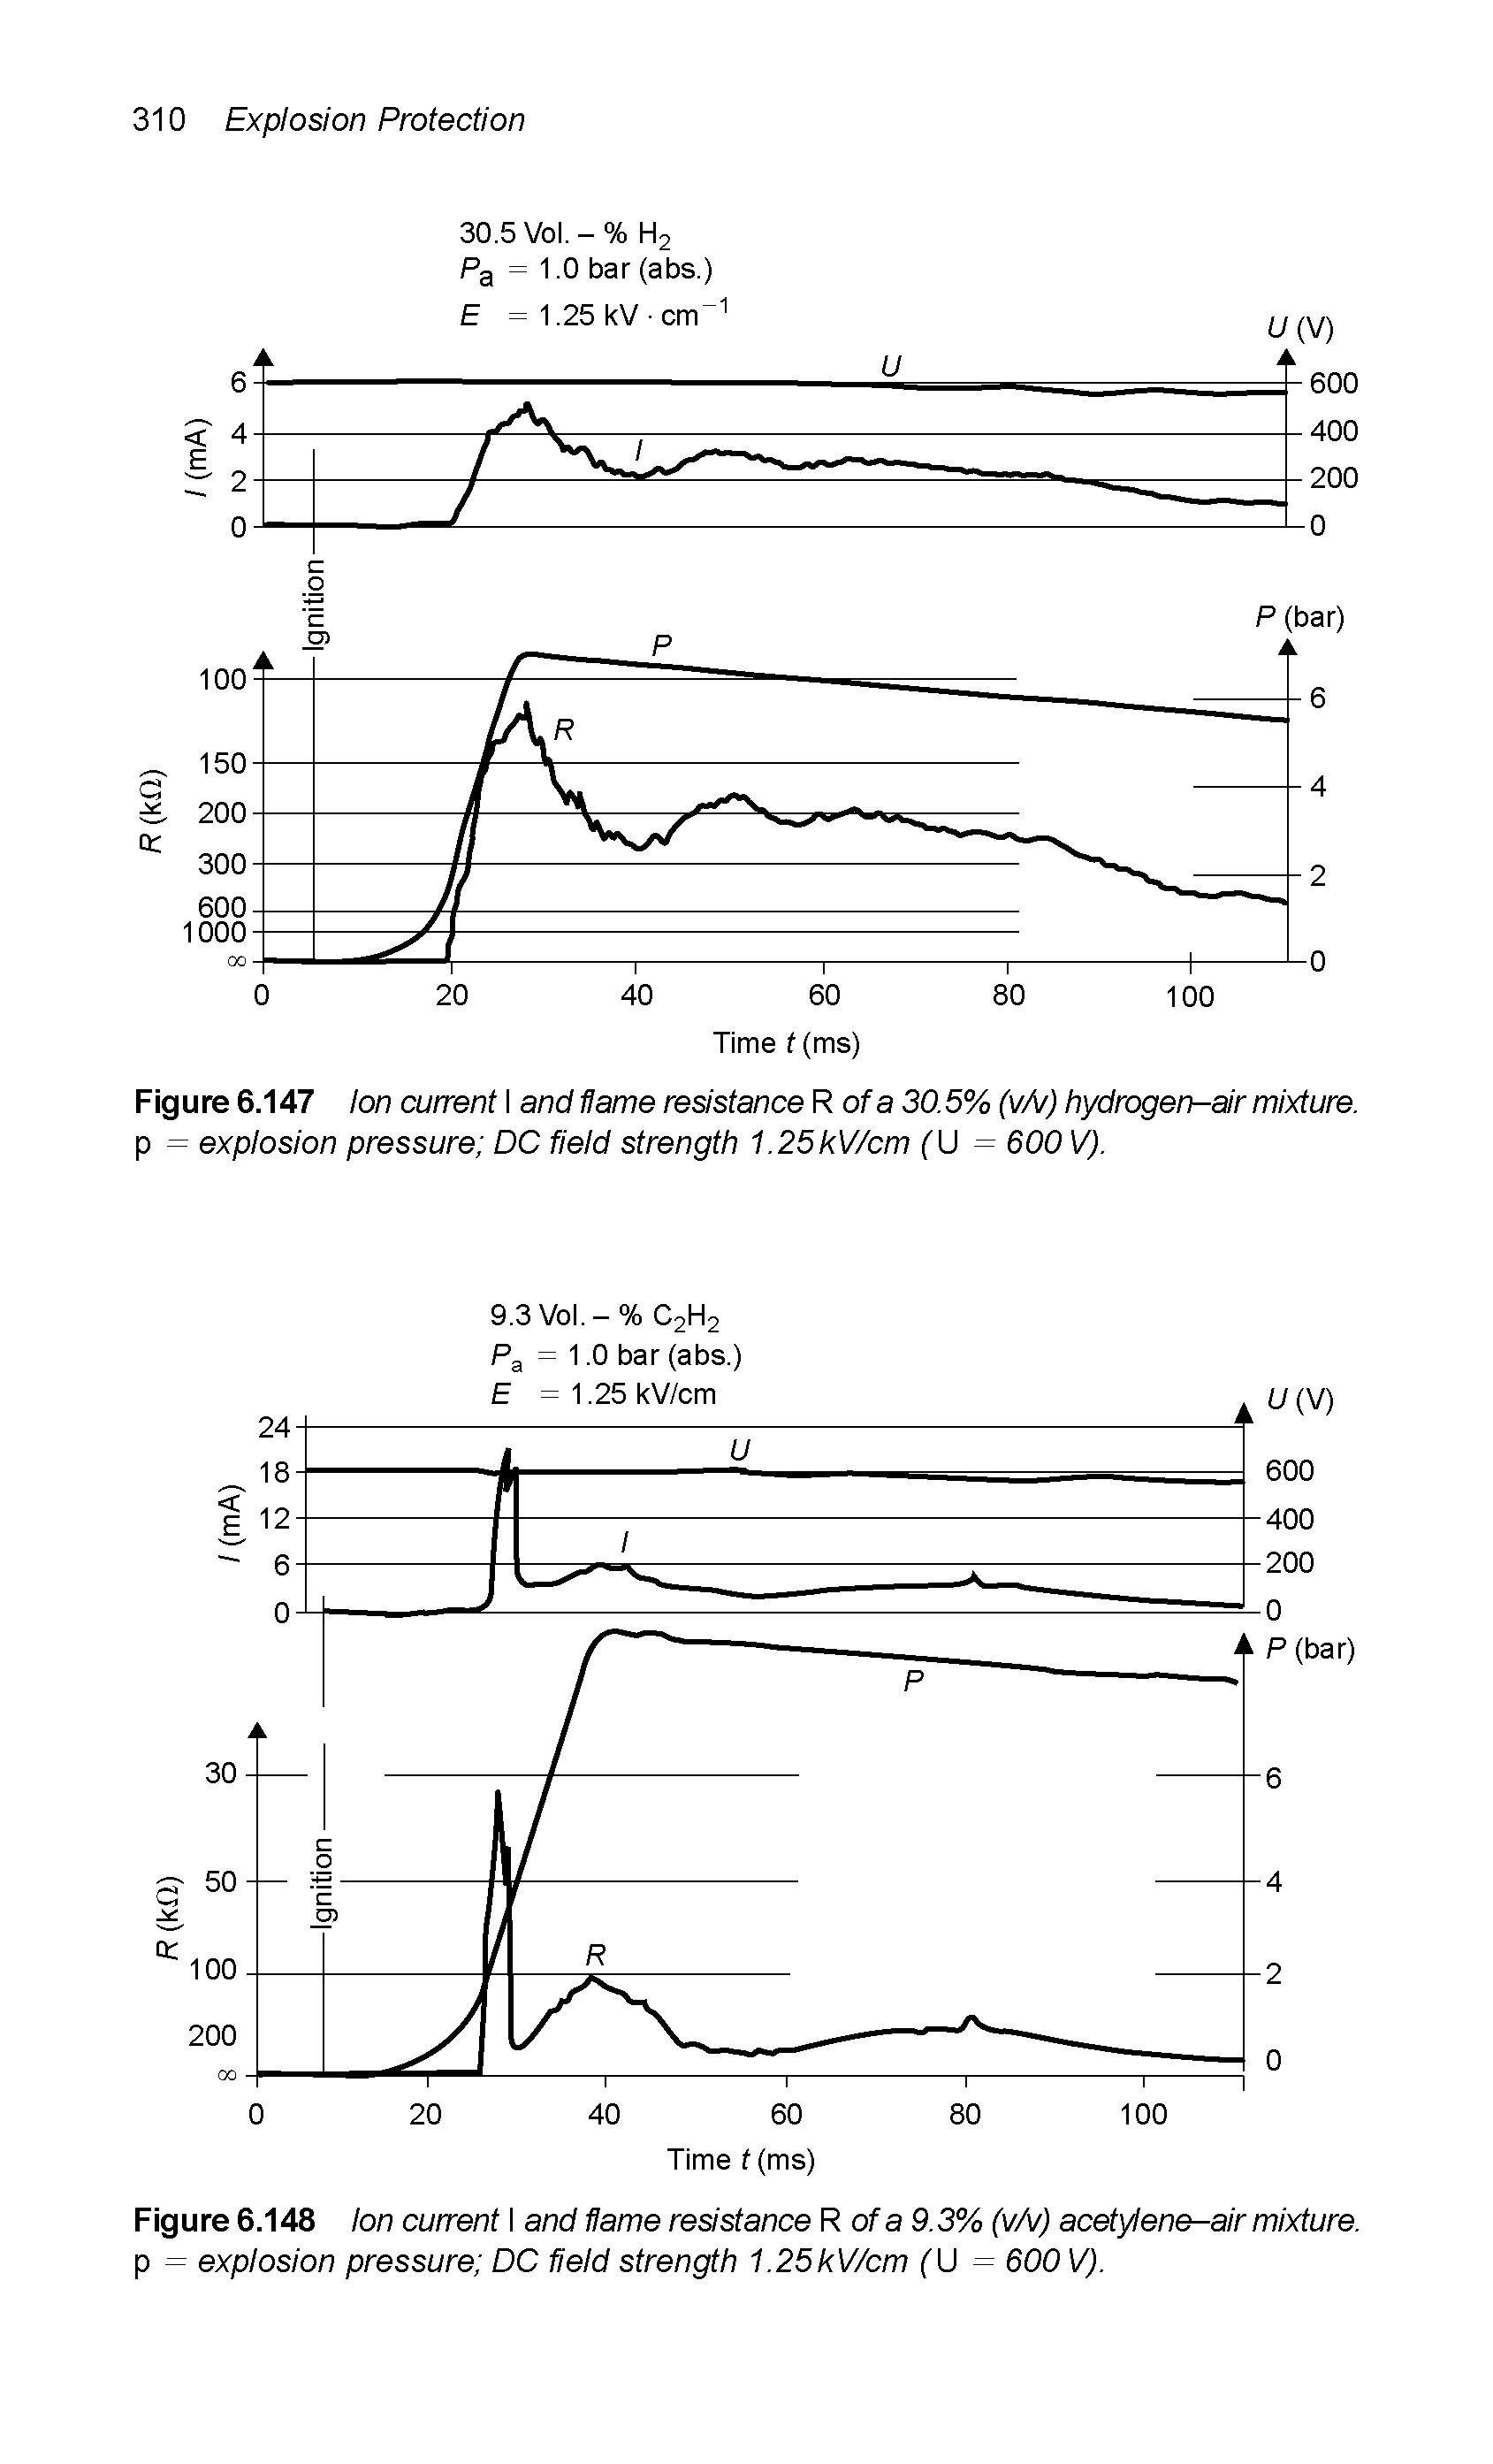 Figure 6.148 Ion current I and flame resistance R of a 9.3% (v/v) acetylene-air mixture. p = explosion pressure DC field strength 1.25kV/cm ( Ll = 600 V).